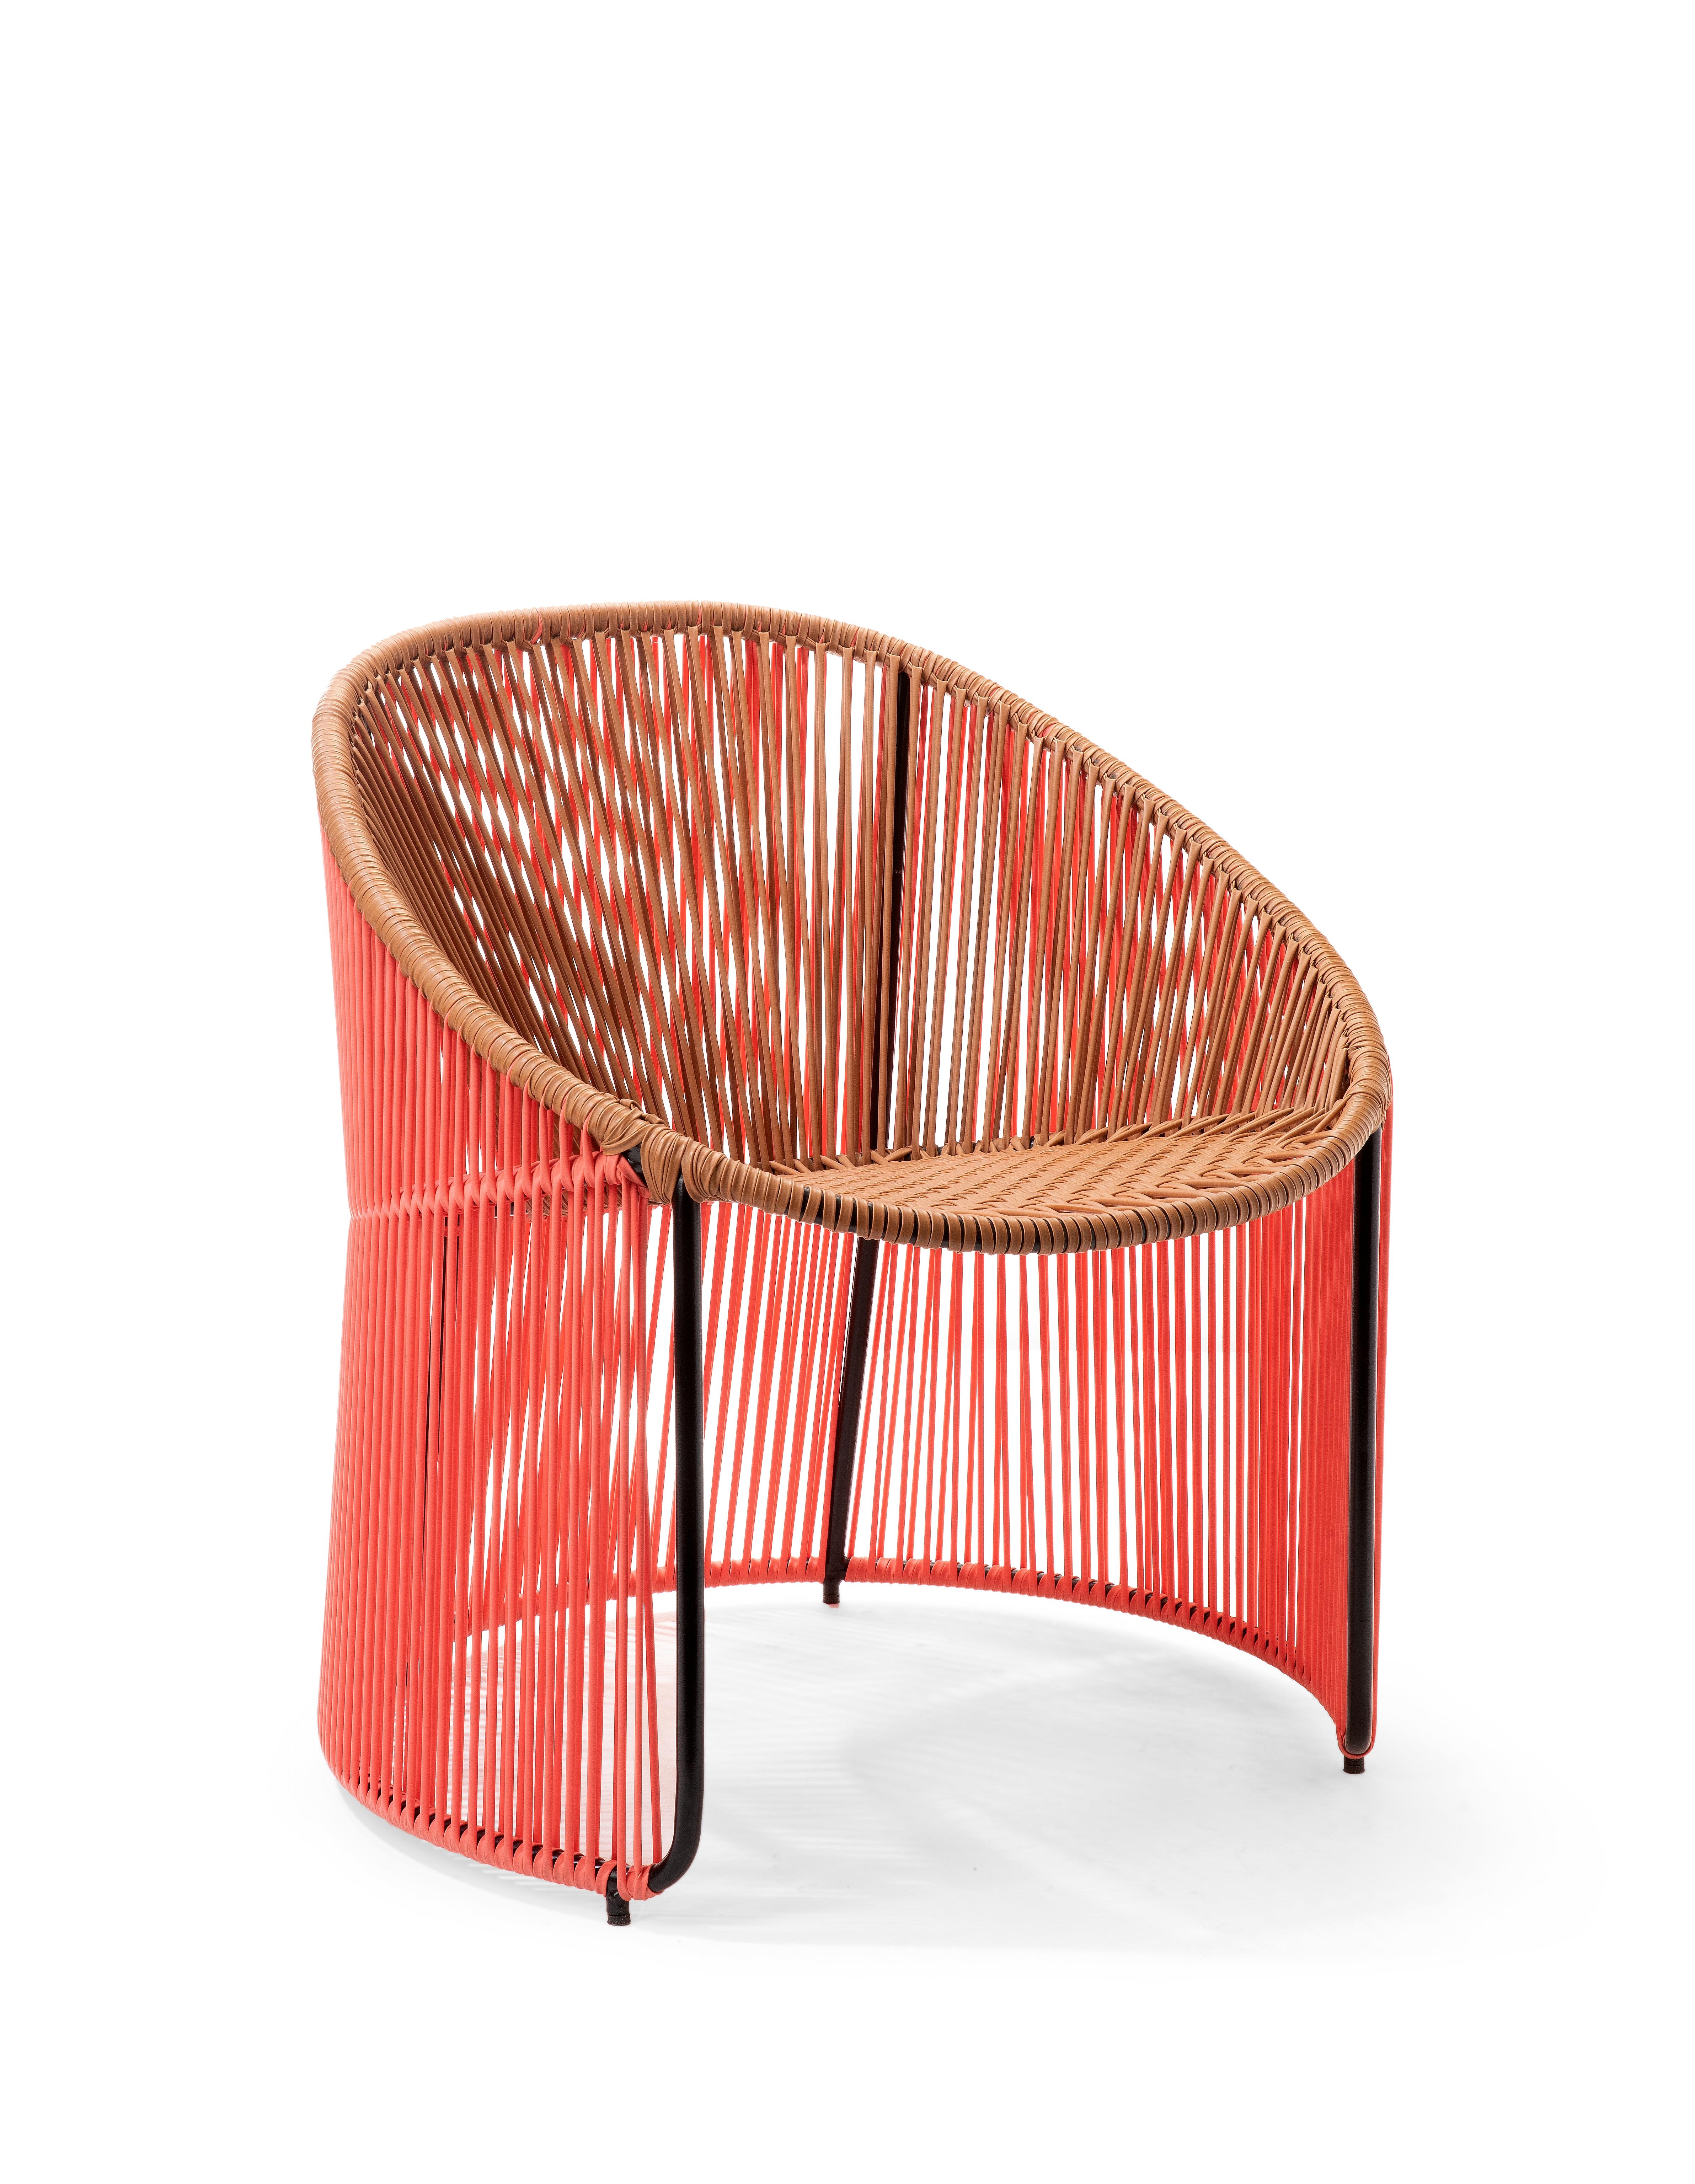 Set of 4 coral Cartagenas lounge chair by Sebastian Herkner.
Materials: PVC strings. Galvanized and powder-coated tubular steel frame
Technique: made from recycled plastic. Weaved by local craftspeople in Colombia. 
Dimensions: W 64 x D 70 x H 74